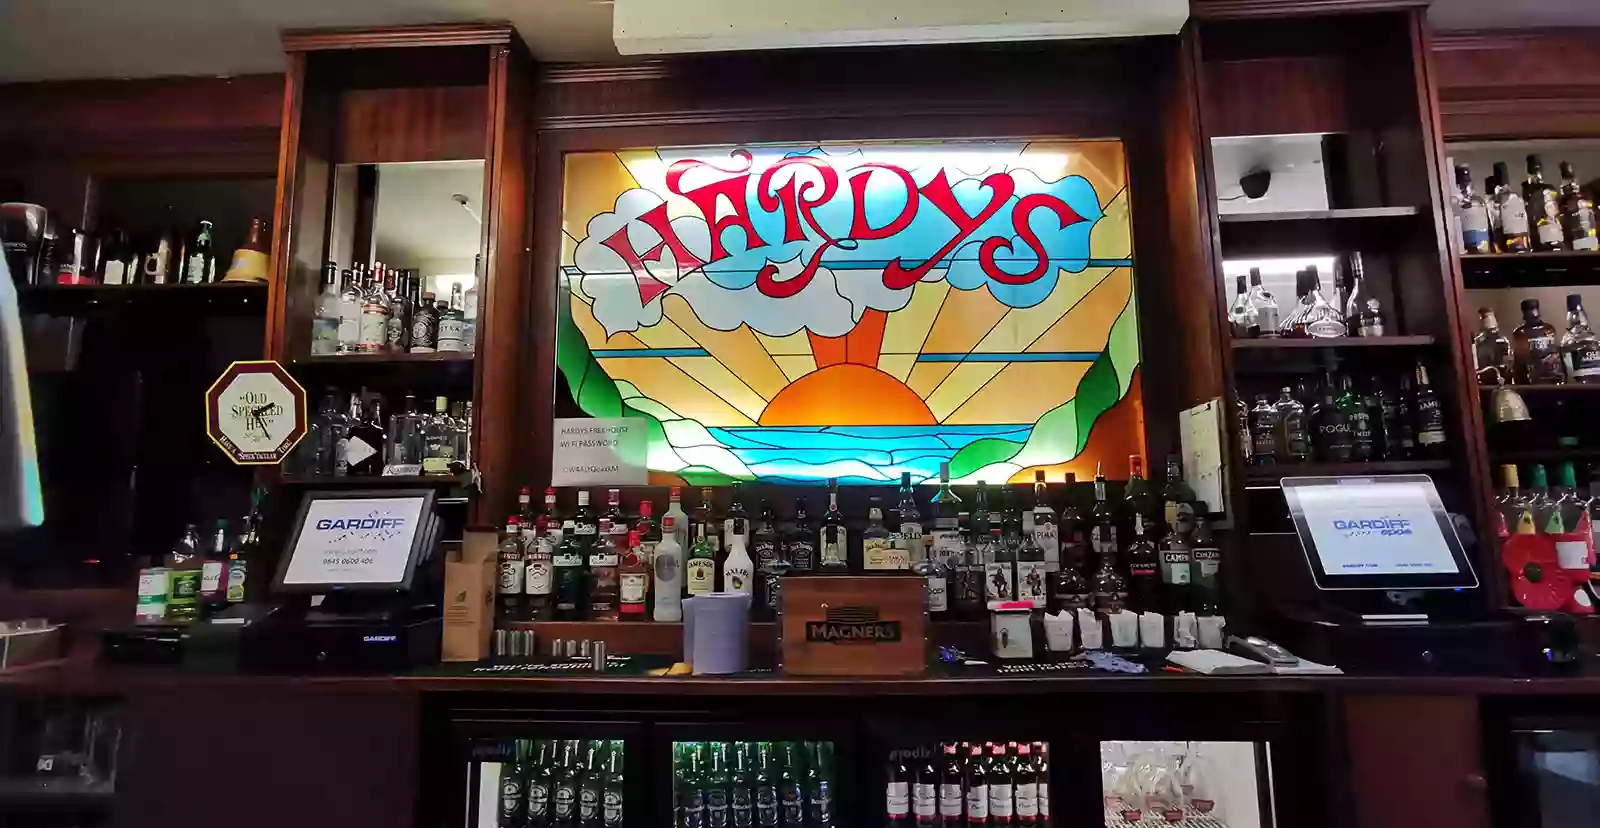 Hardy's Freehouse